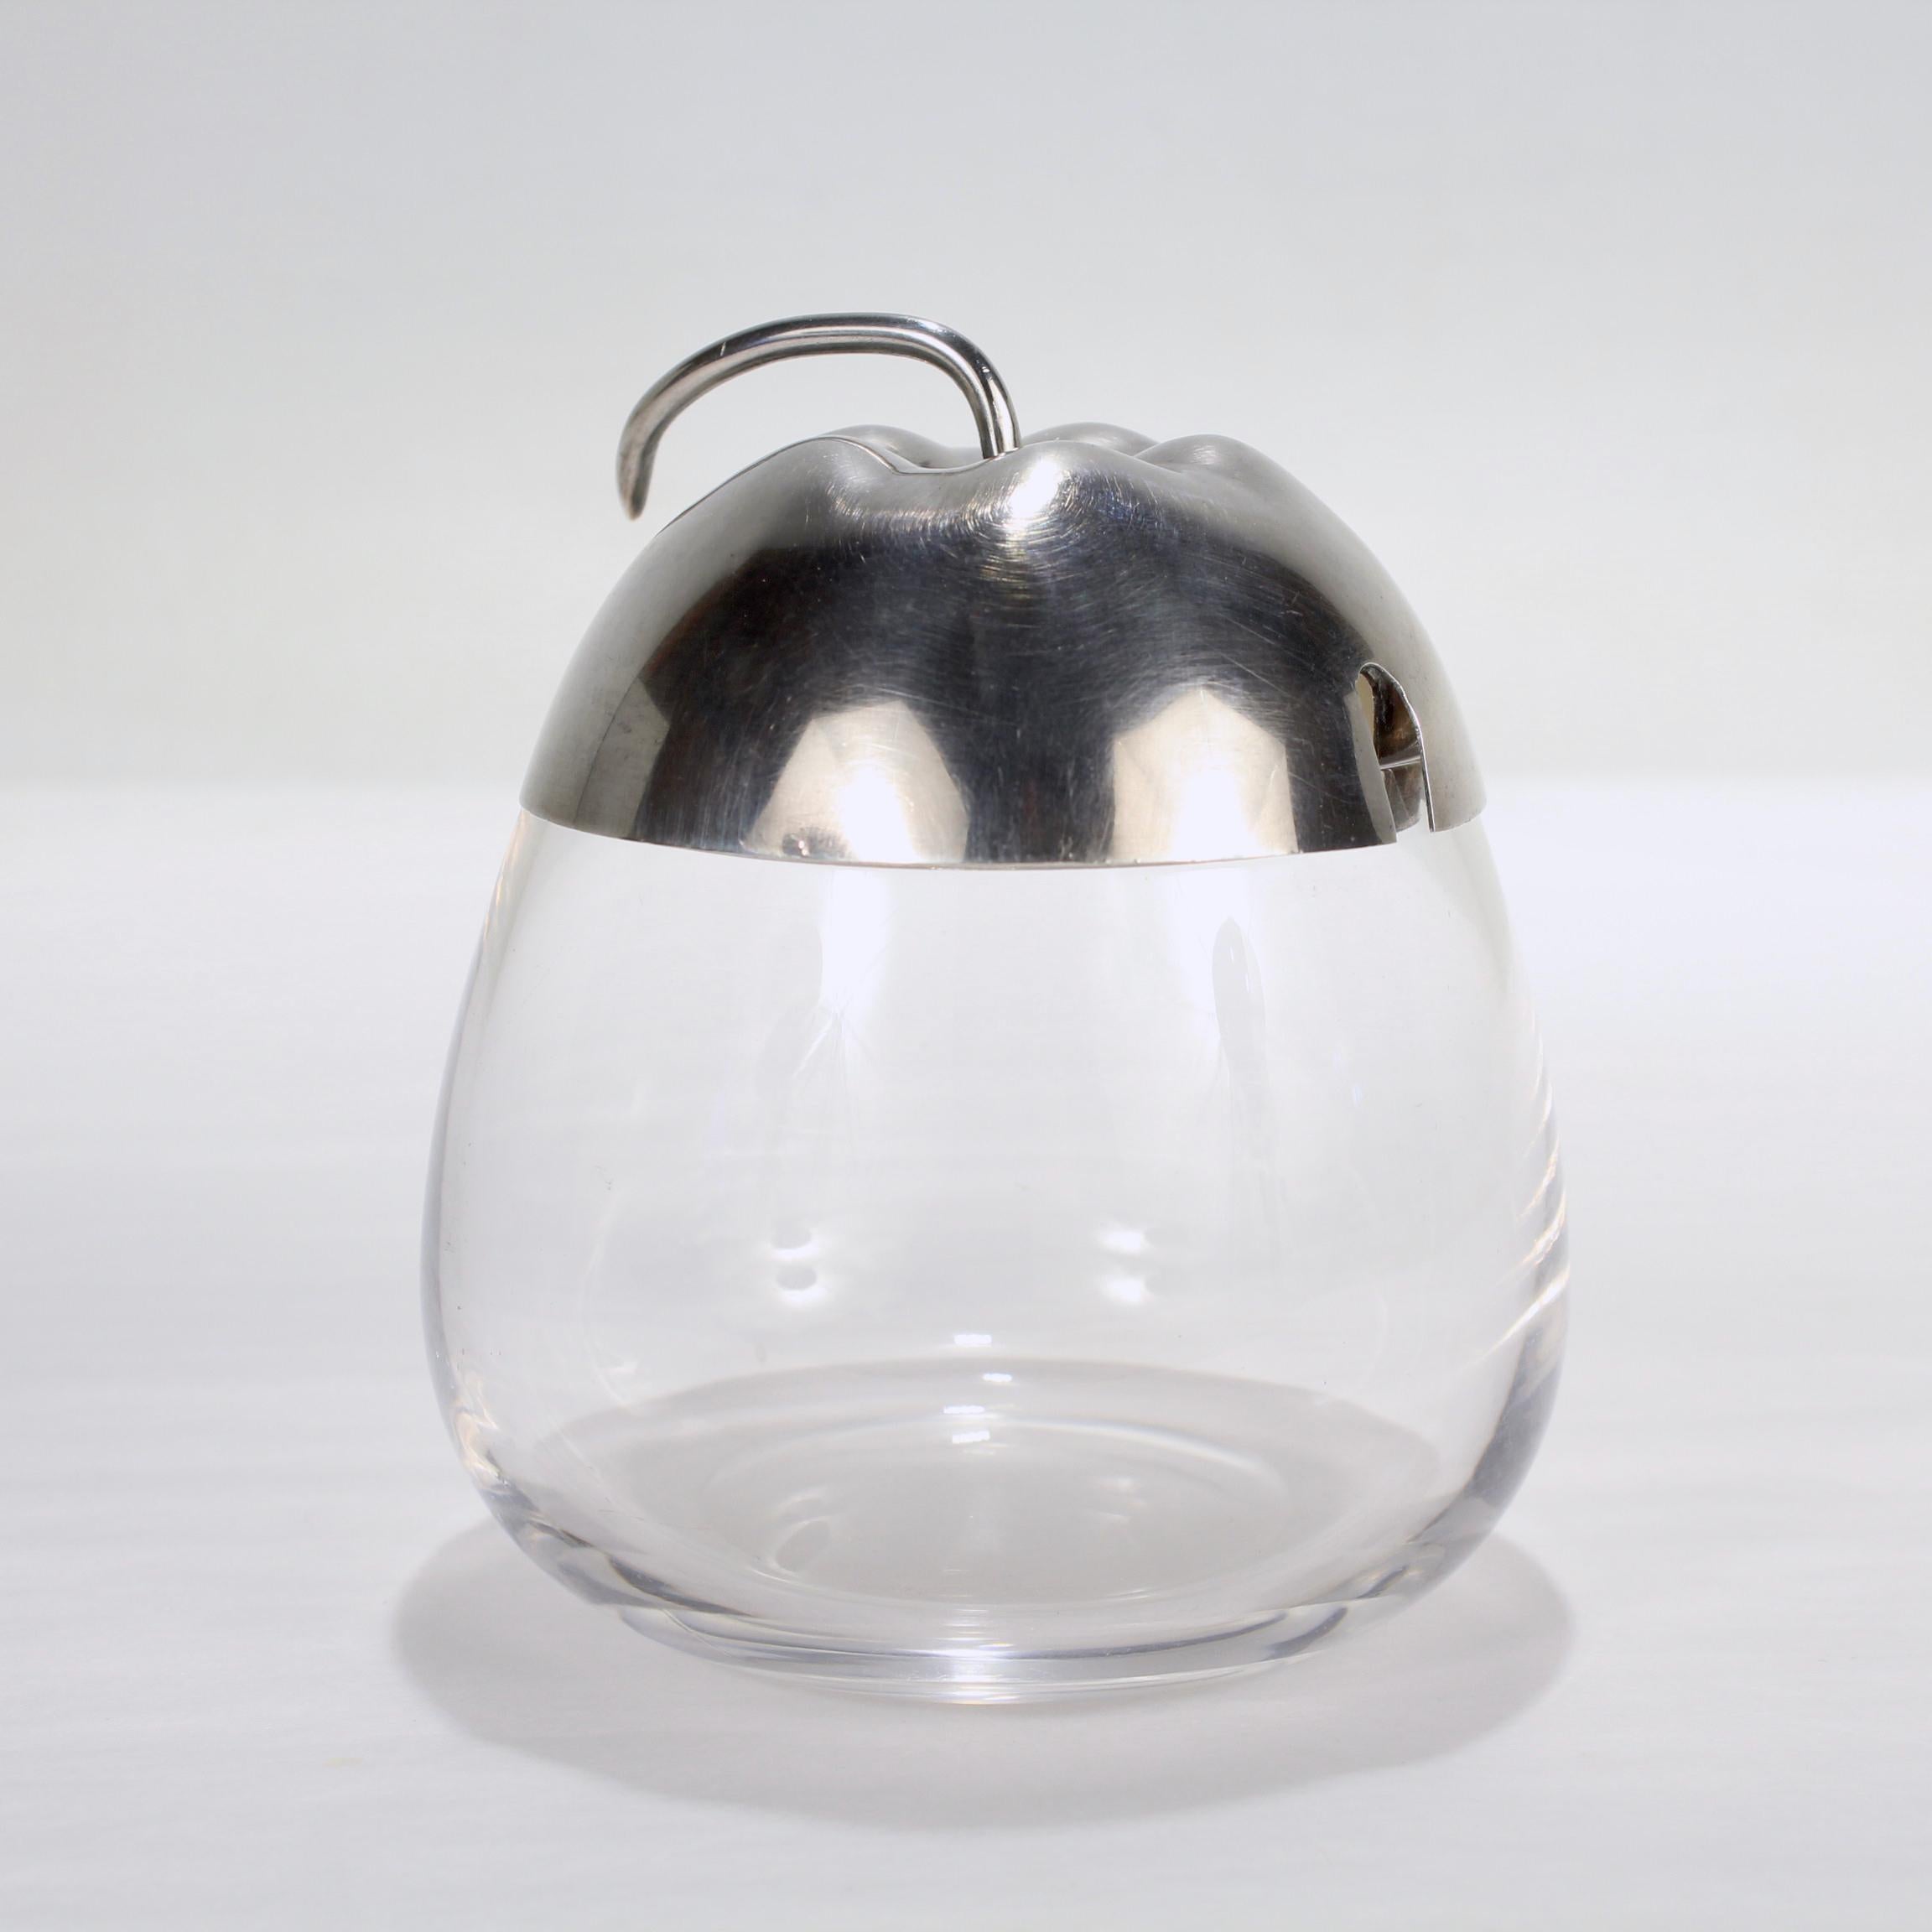 A fine Mid-Century Modern sterling silver & glass jam or honey pot.

By Gorham.

In the form of a pear. 

Simply a great jar!

Date:
Mid-20th Century

Overall Condition:
It is in overall good, as-pictured, used estate condition.

Condition